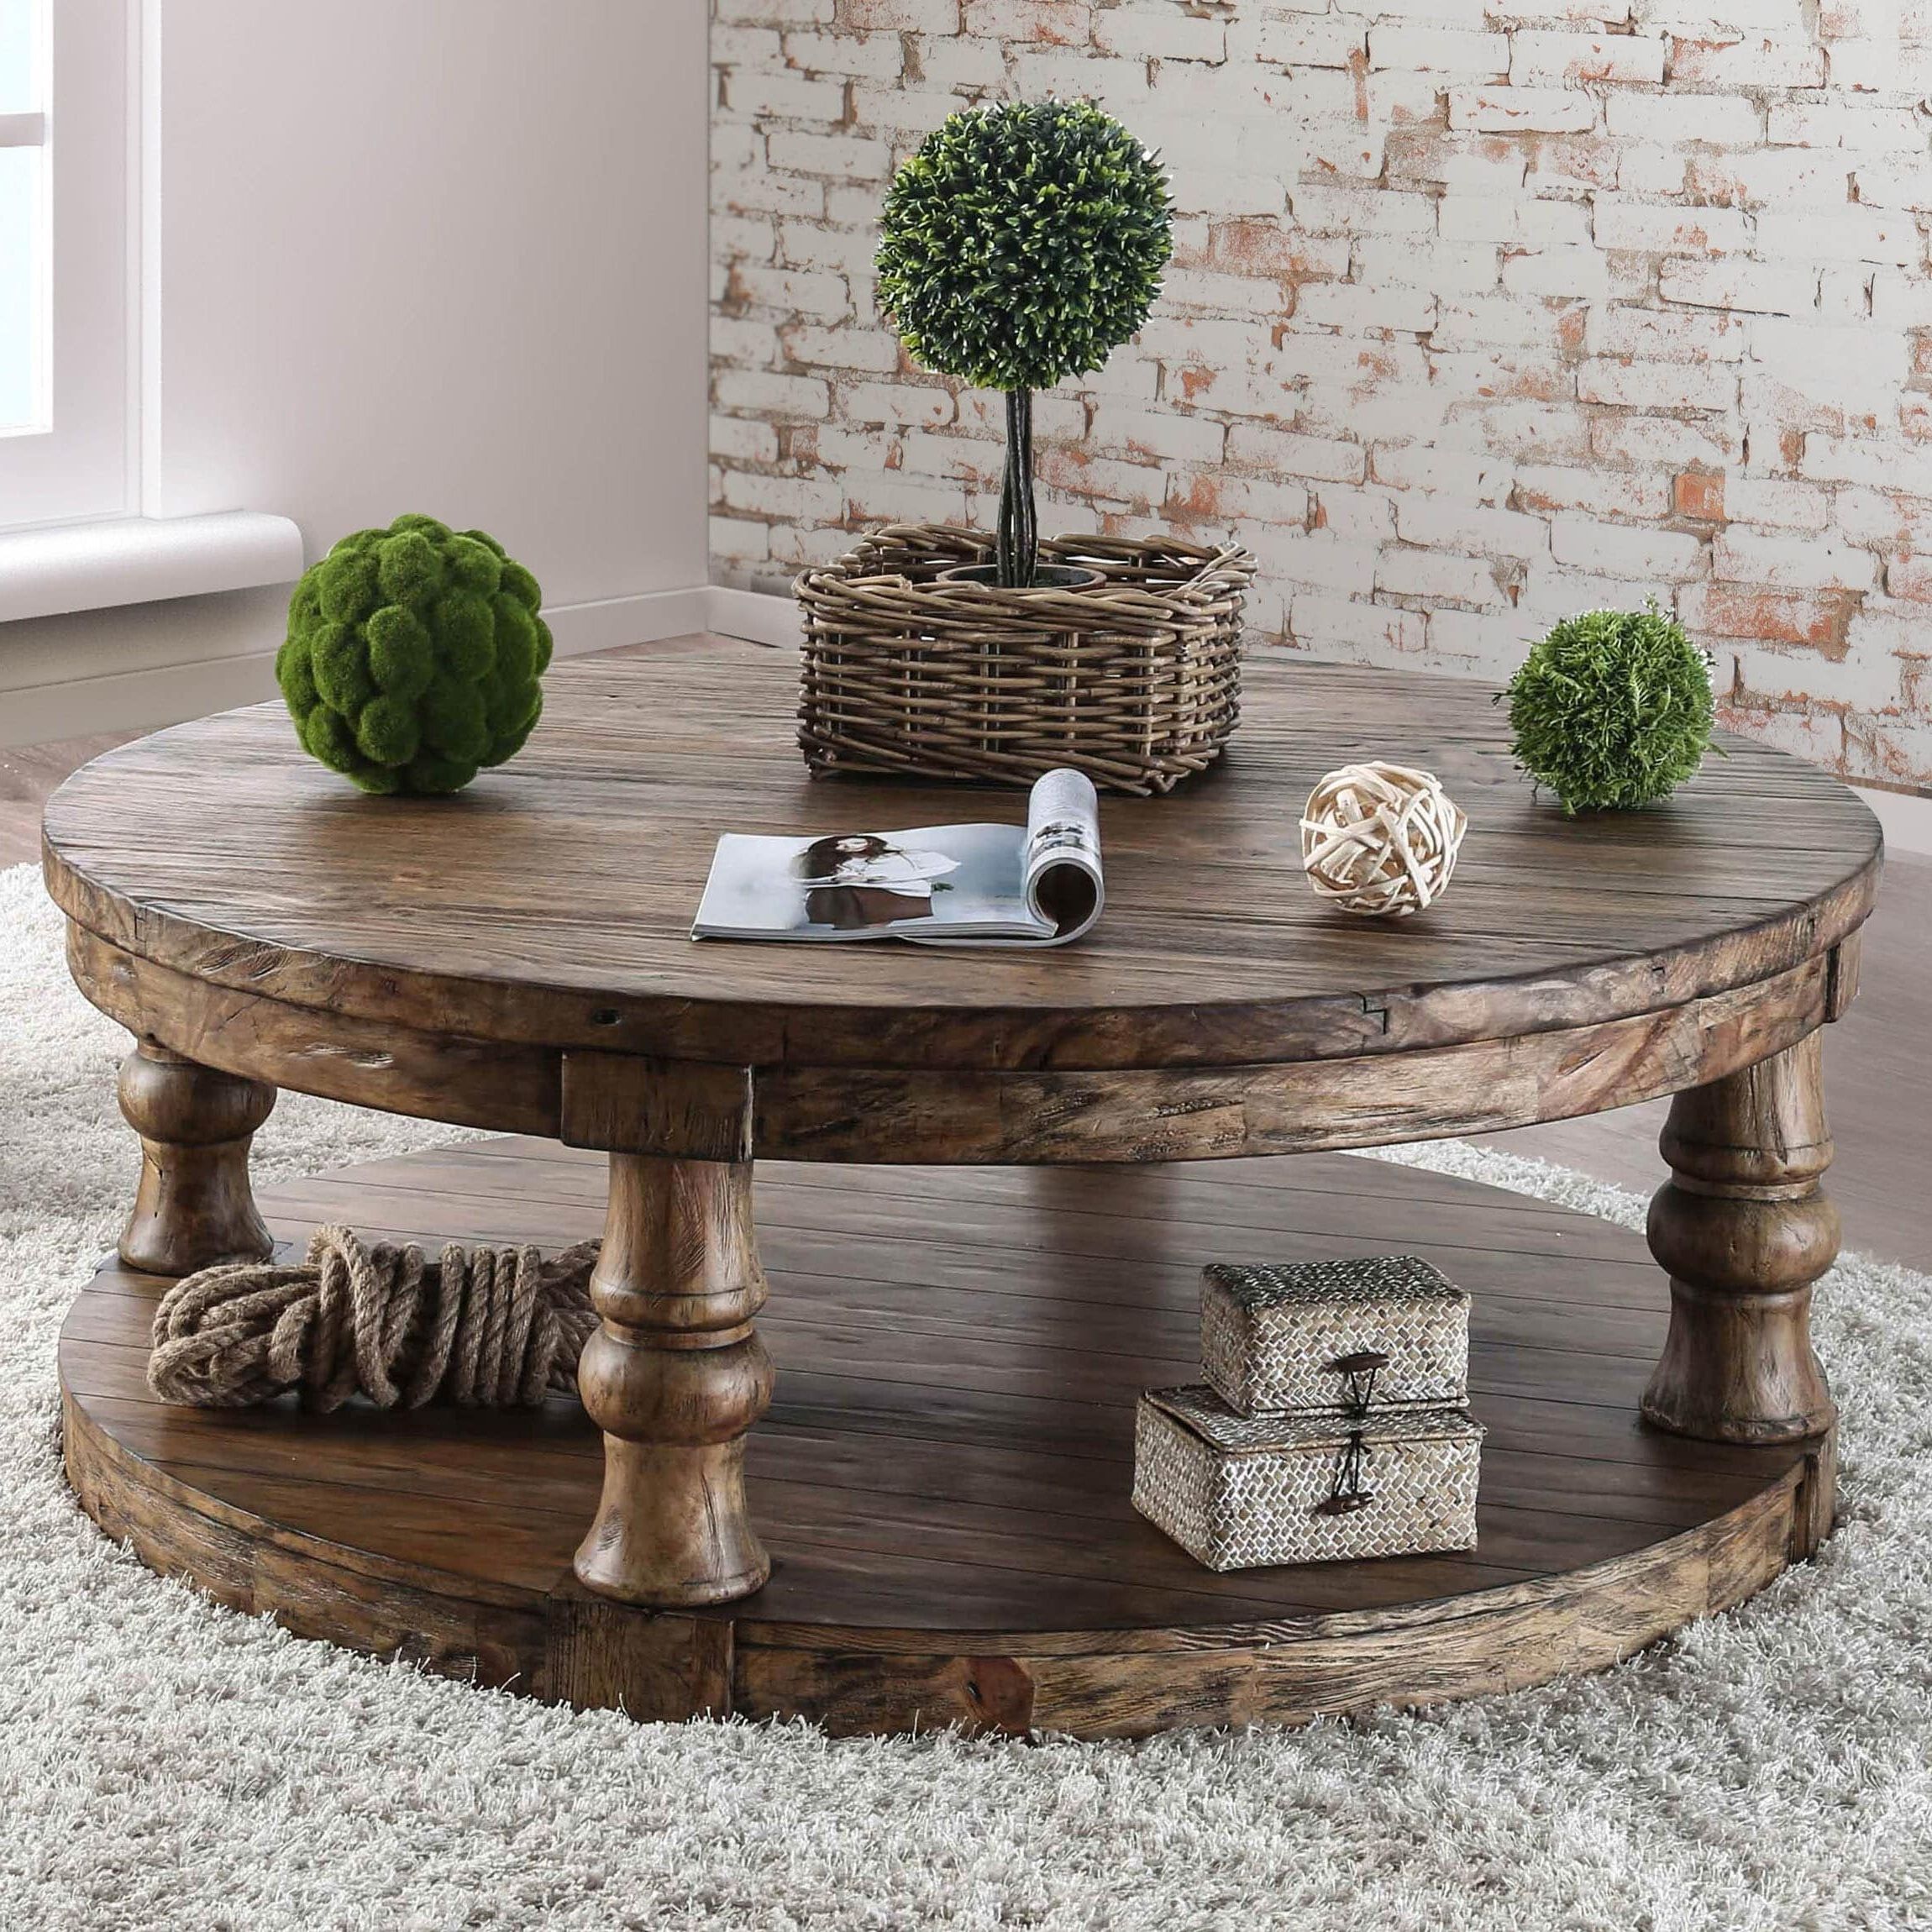 Round Rustic Coffee Table Sets – Rustic Coffee Tables That You Need To In Well Liked Rustic Coffee Tables (View 13 of 15)